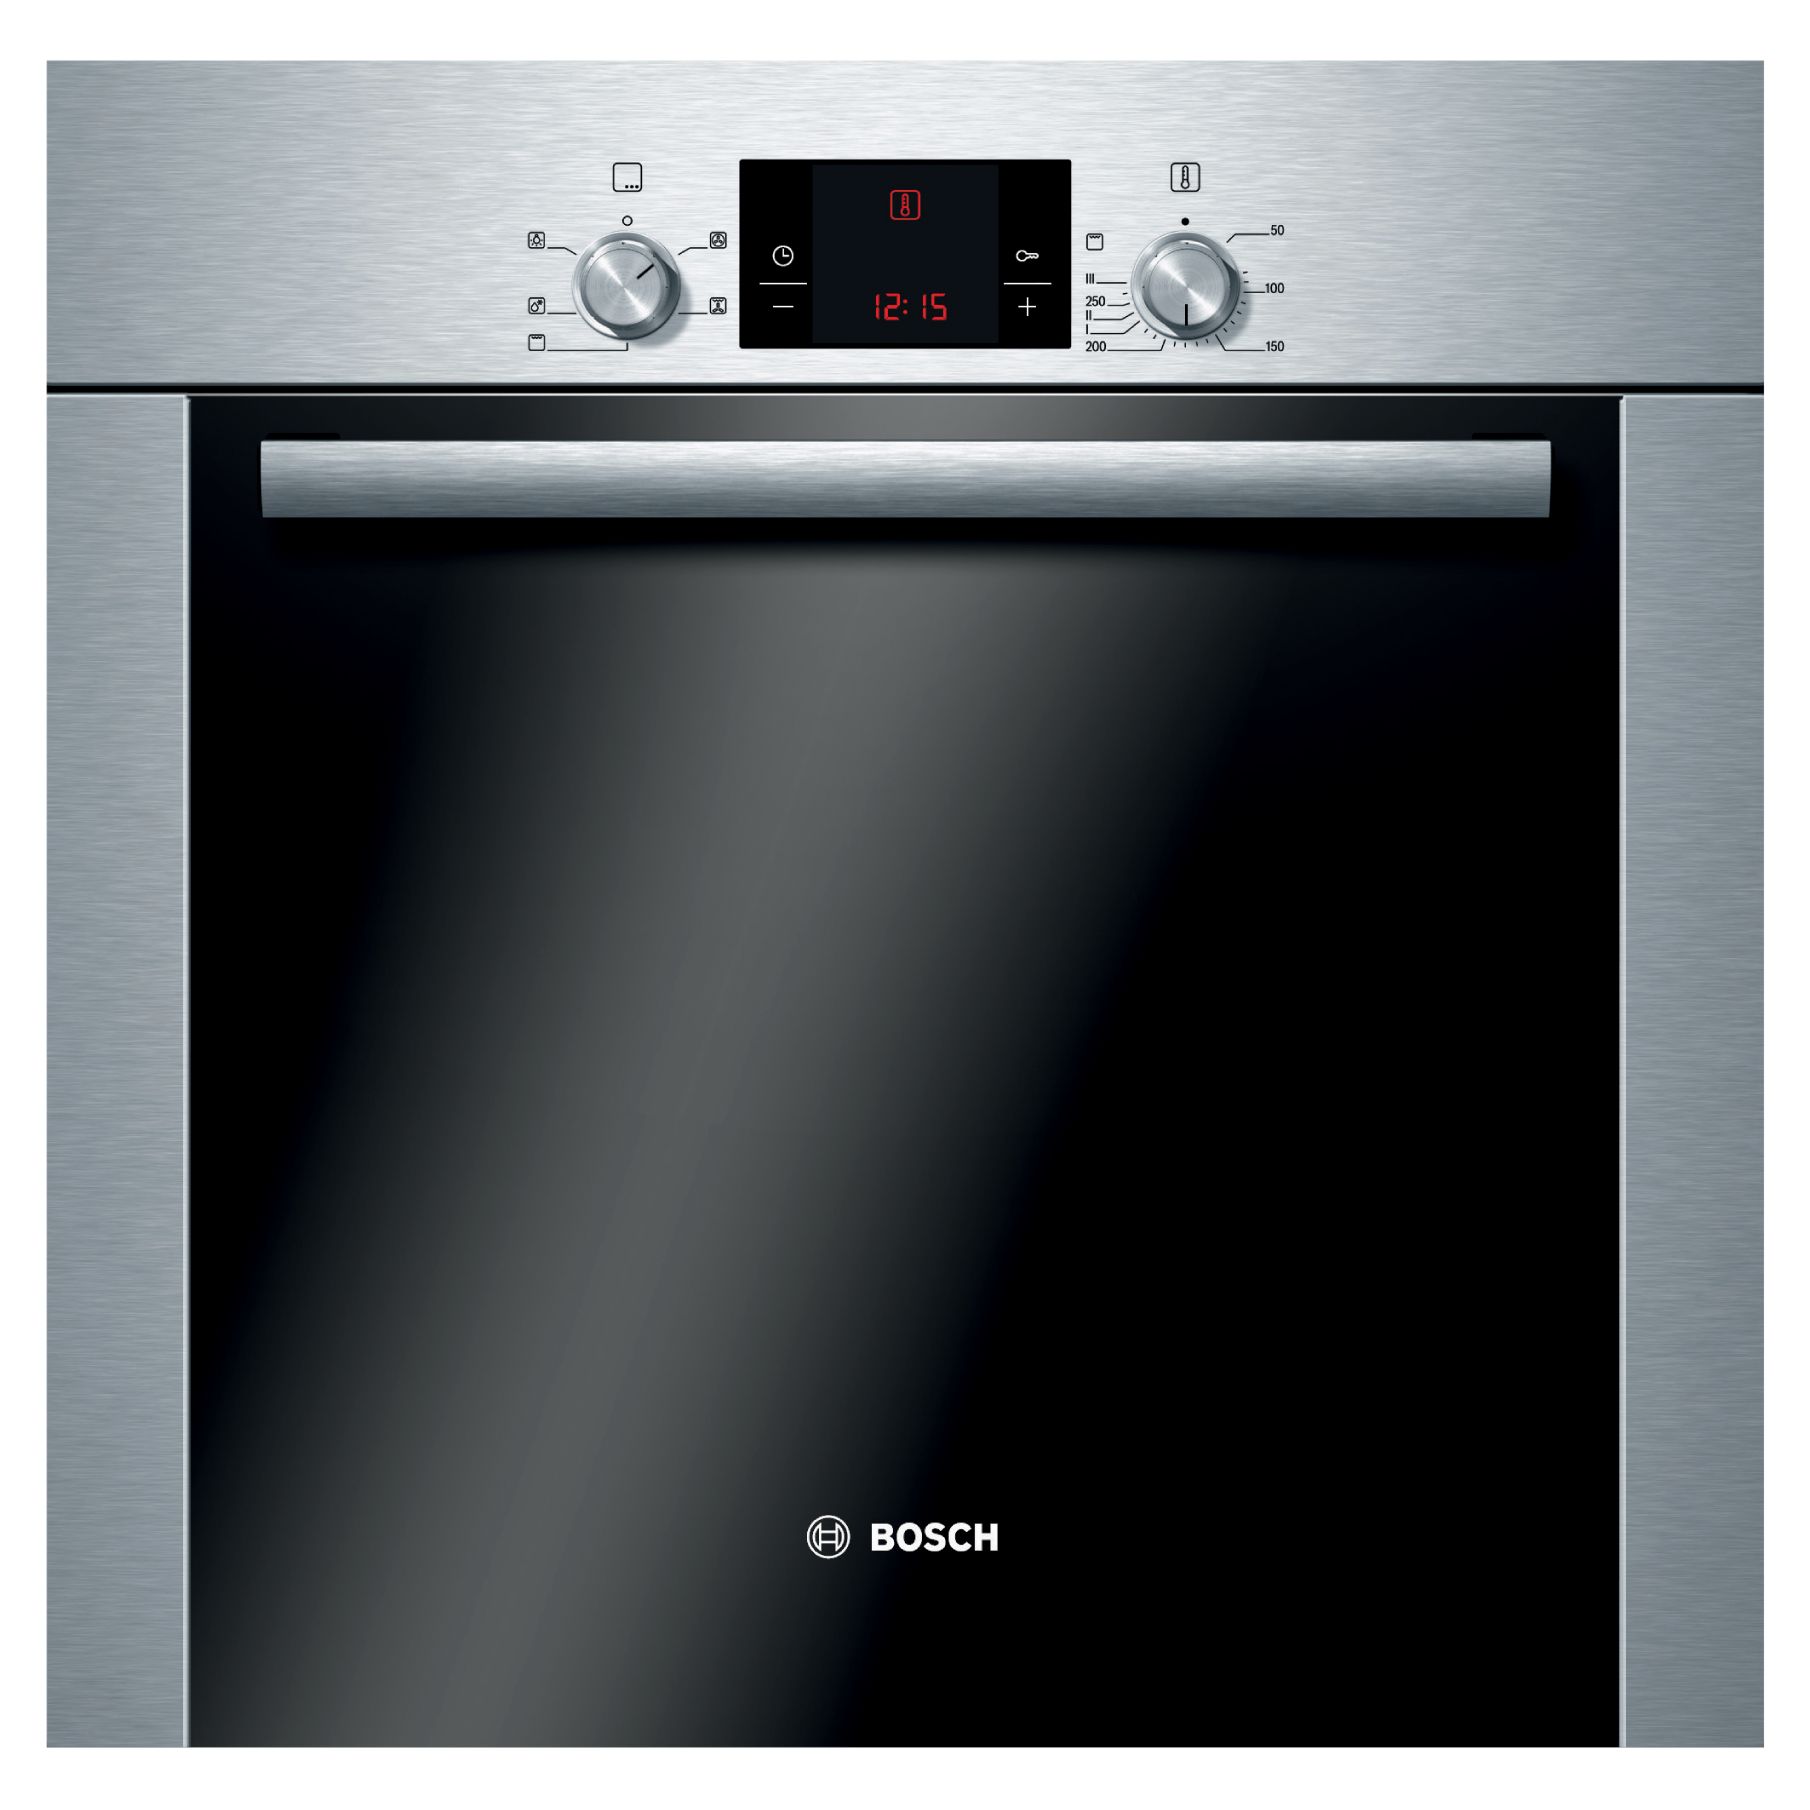 Bosch HBA13B251B Single Electric Oven, Stainless Steel at JohnLewis